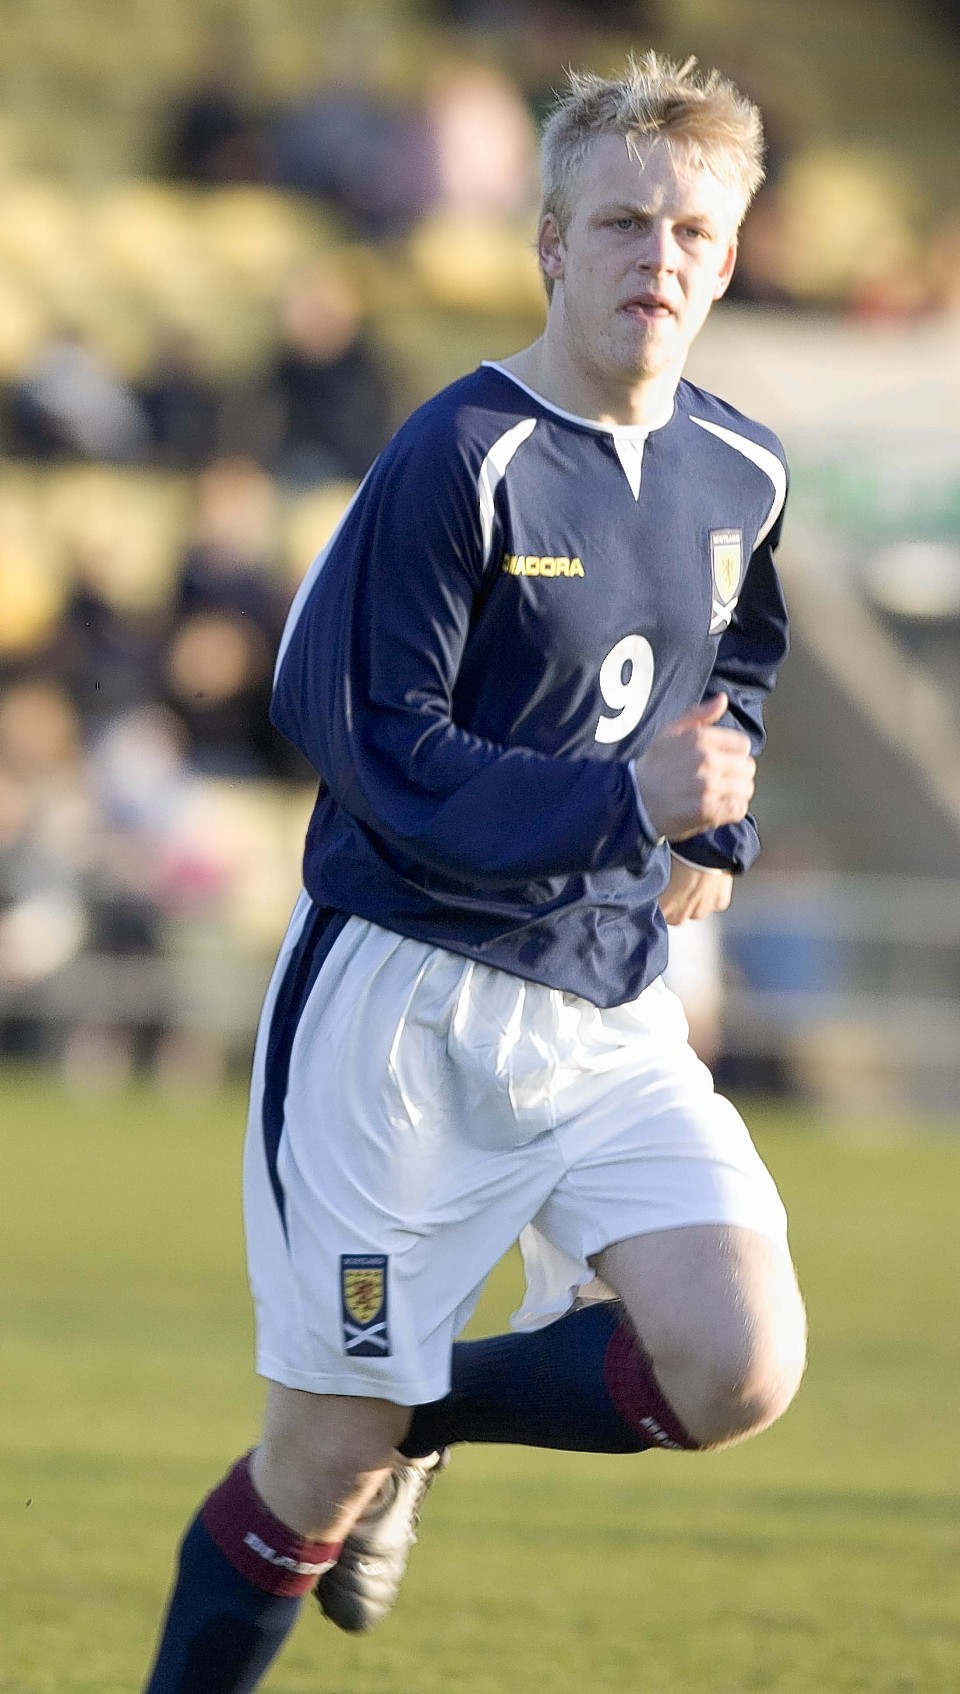 Steven Naismith: Naimsith found the net five times in his 15 appeartances for the under-21s but here he is before that, playing for the under-19s against Norway